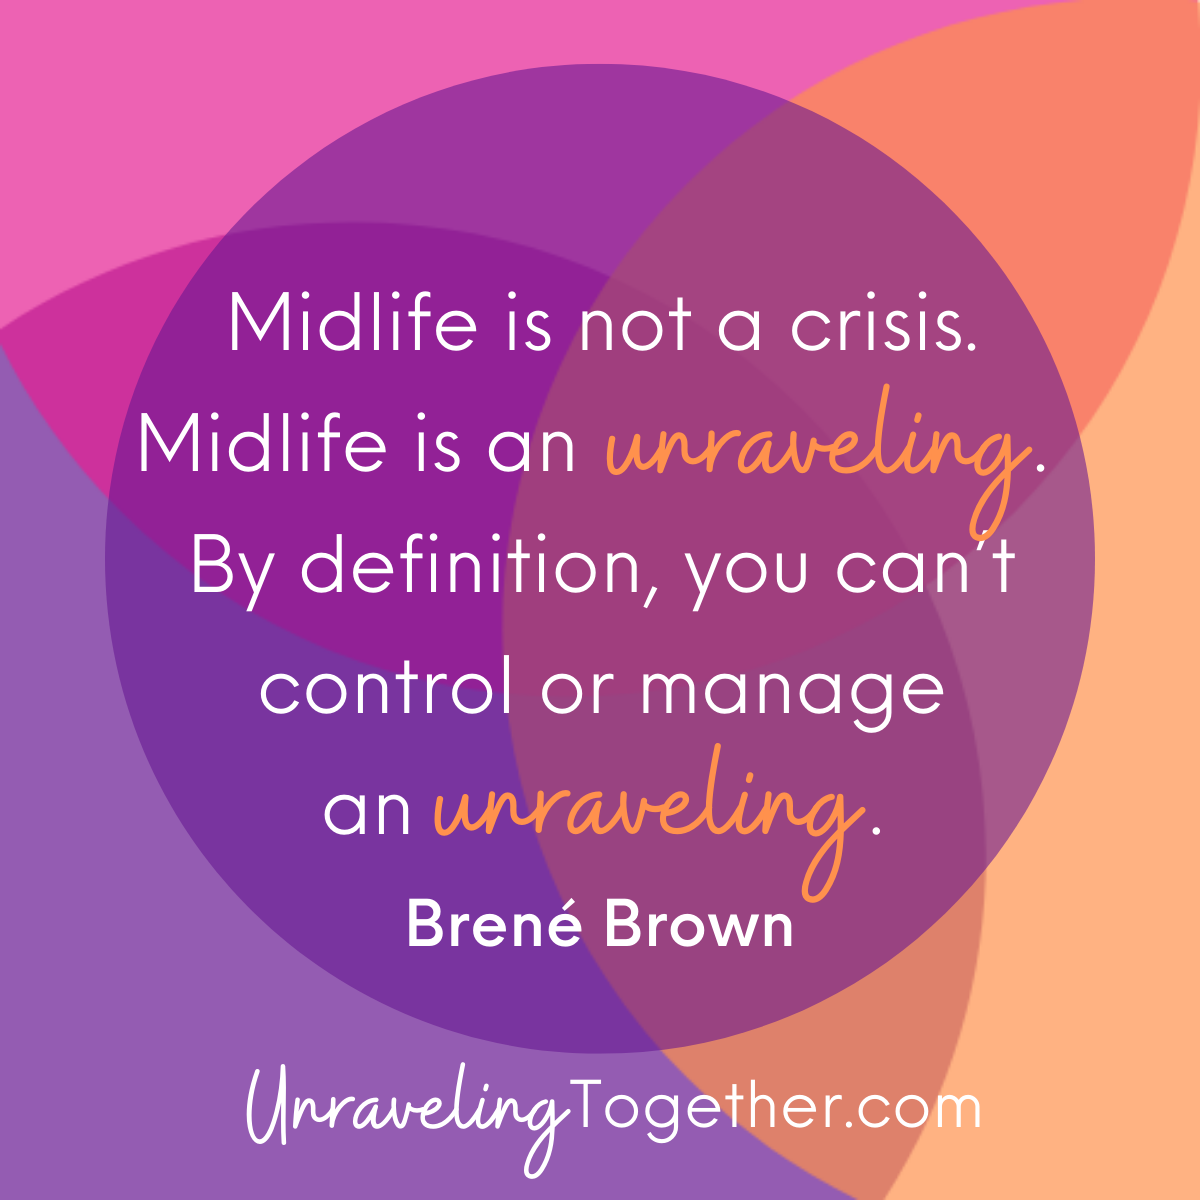 Brene Brown Quote: "Midlife is not a crisis. Midlife is an unraveling.  By definition, you can’t control or manage an unraveling.”